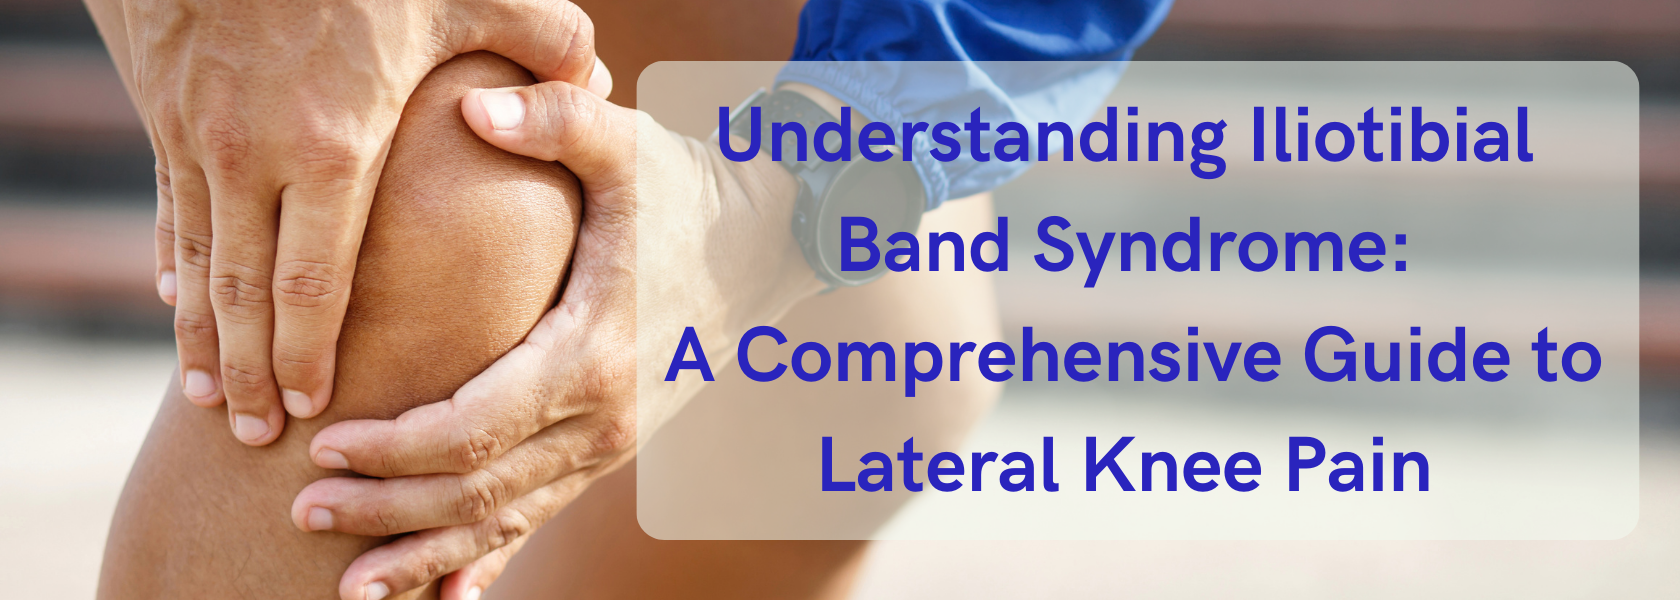 Physical Therapist's Guide to Iliotibial Band Syndrome (ITBS or It